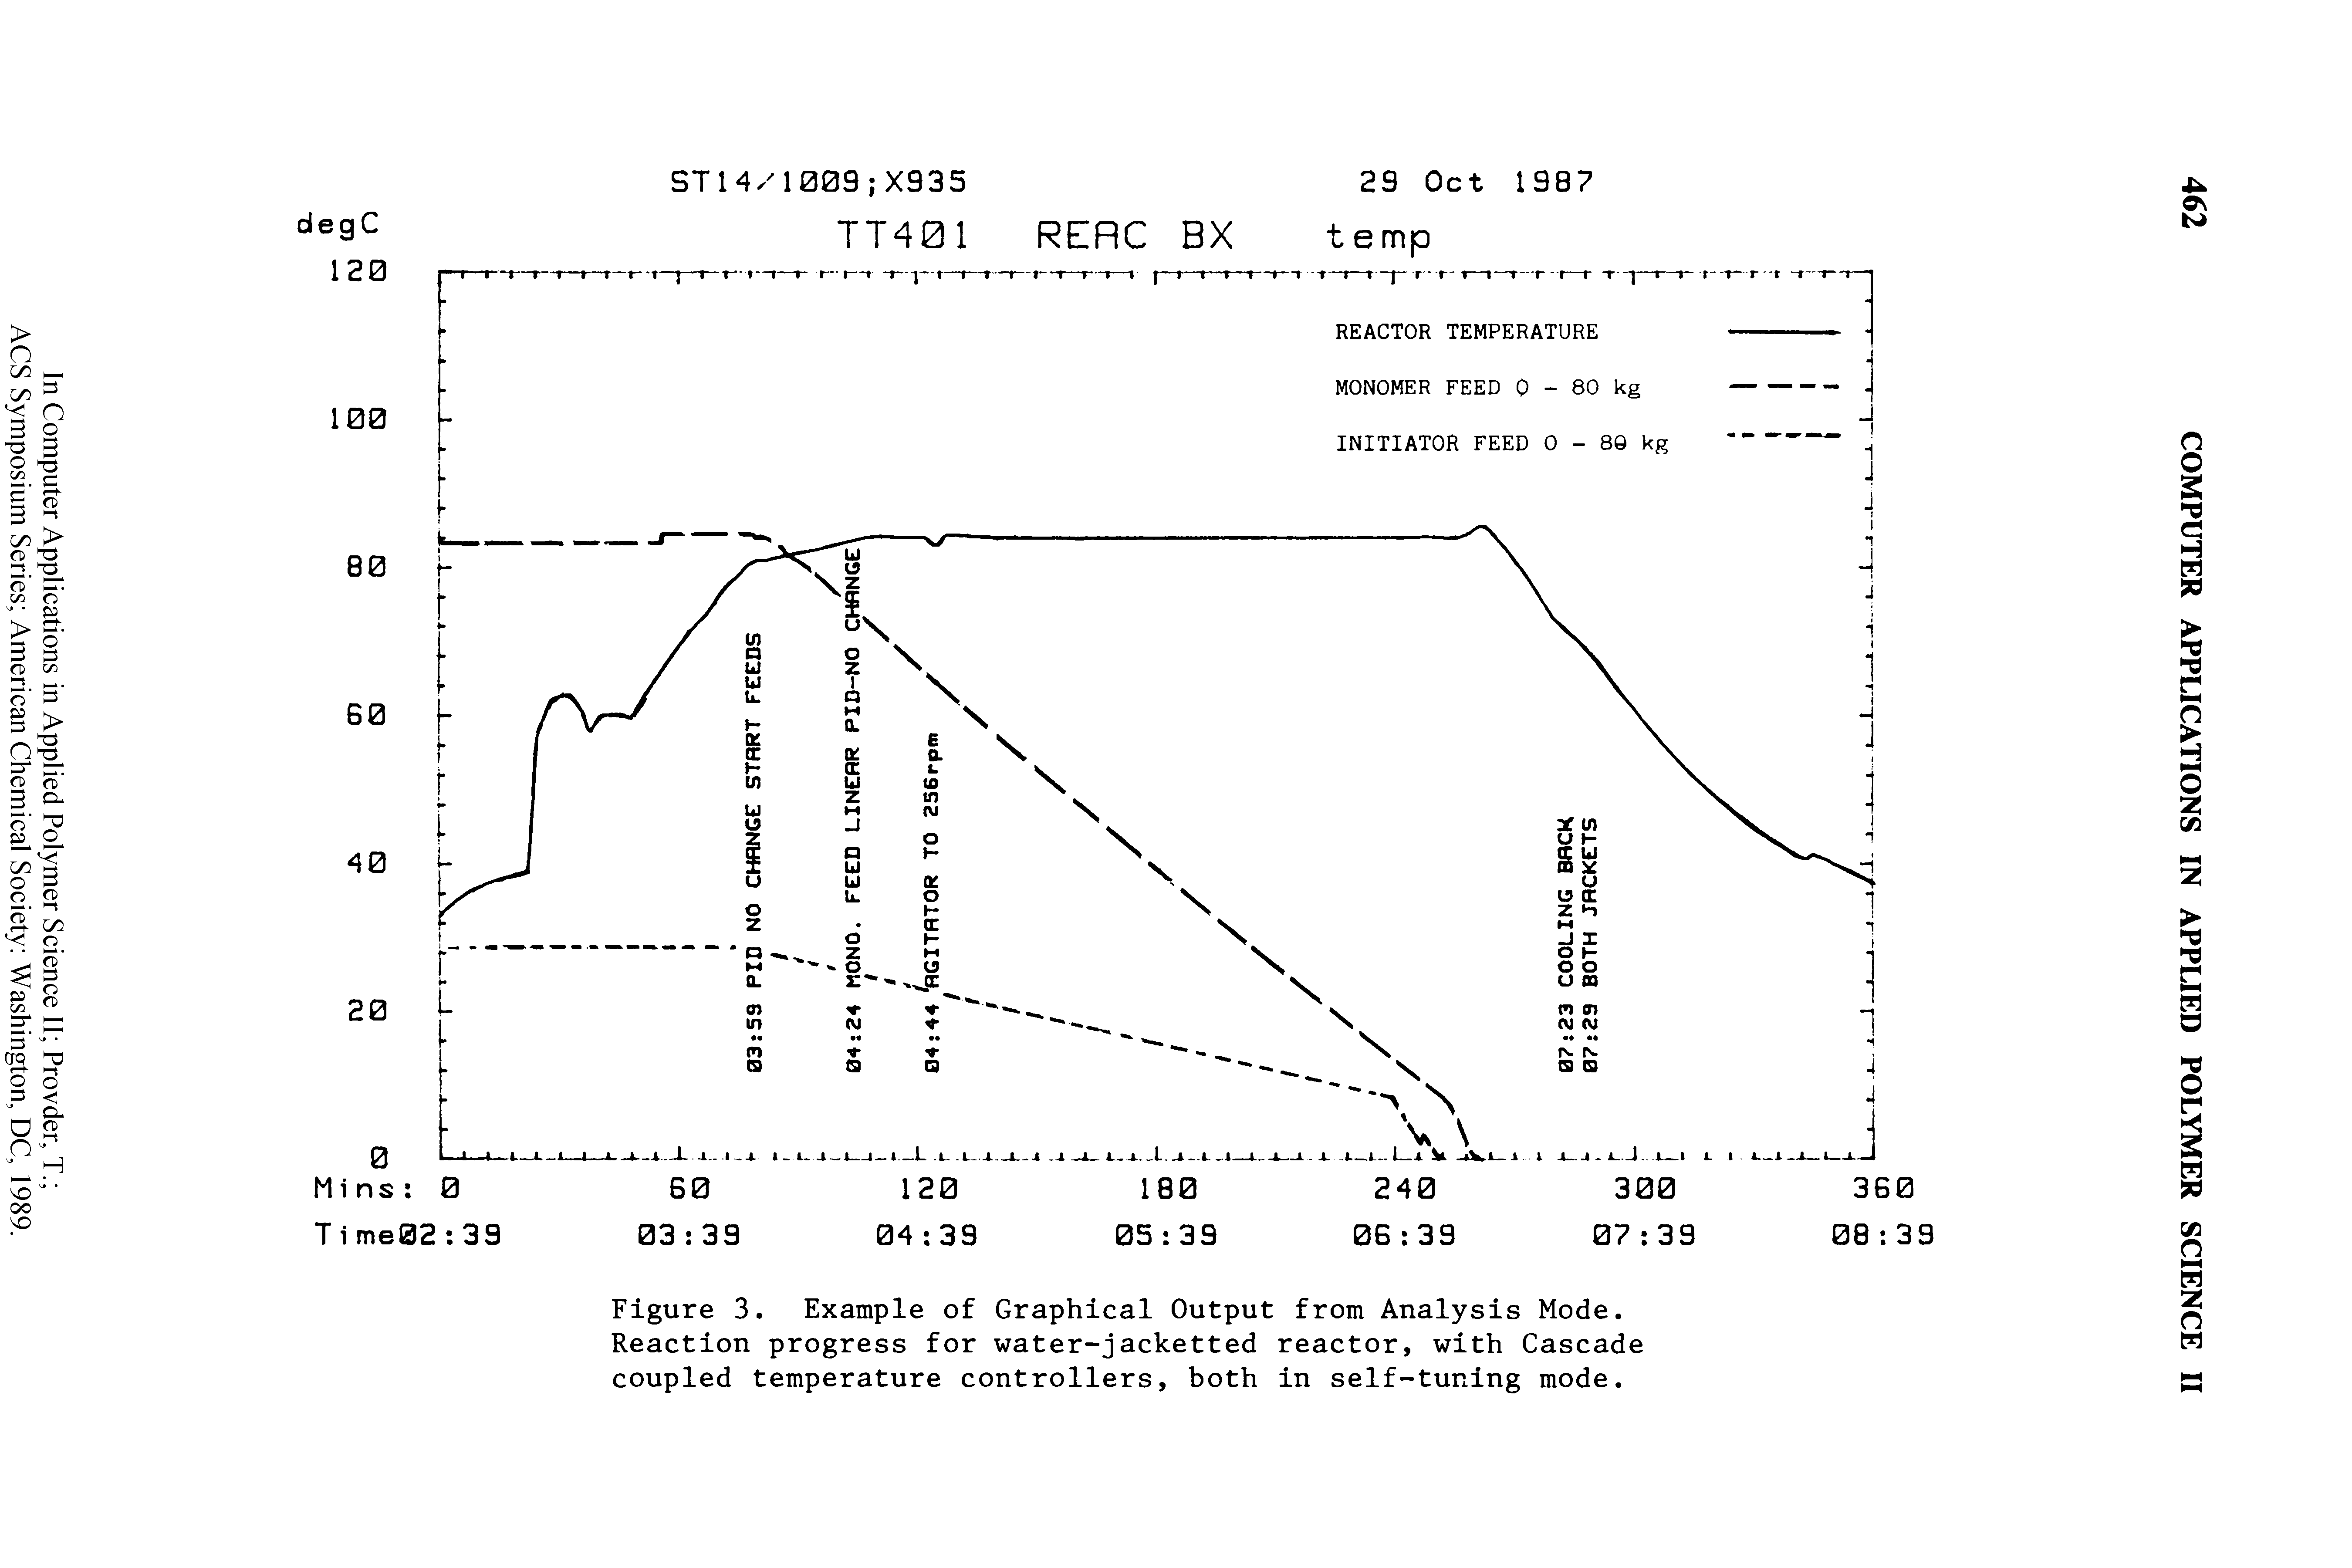 Figure 3. Example of Graphical Output from Analysis Mode. Reaction progress for water-jacketted reactor, with Cascade coupled temperature controllers, both in self-tuning mode.